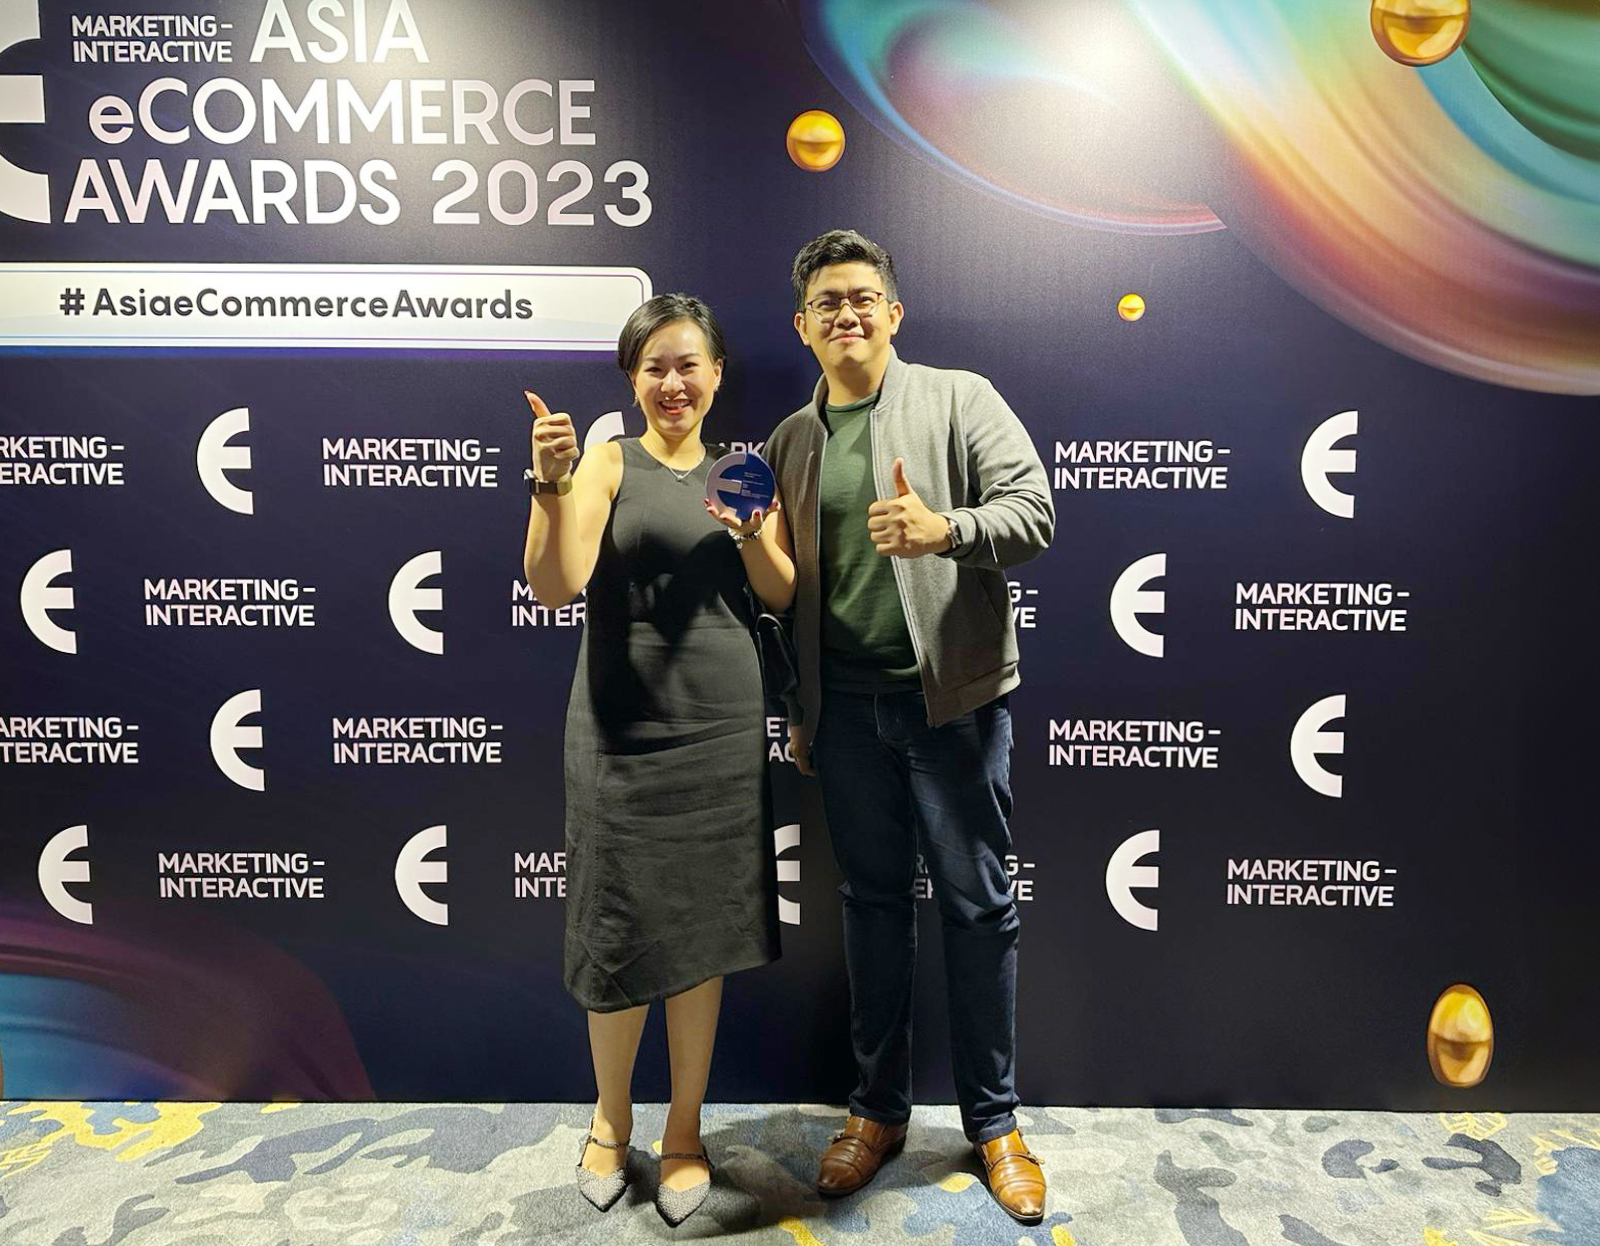 SmartOSC Secures Consecutive Silver Wins For OSIM Project At Asia eCommerce Awards 2023